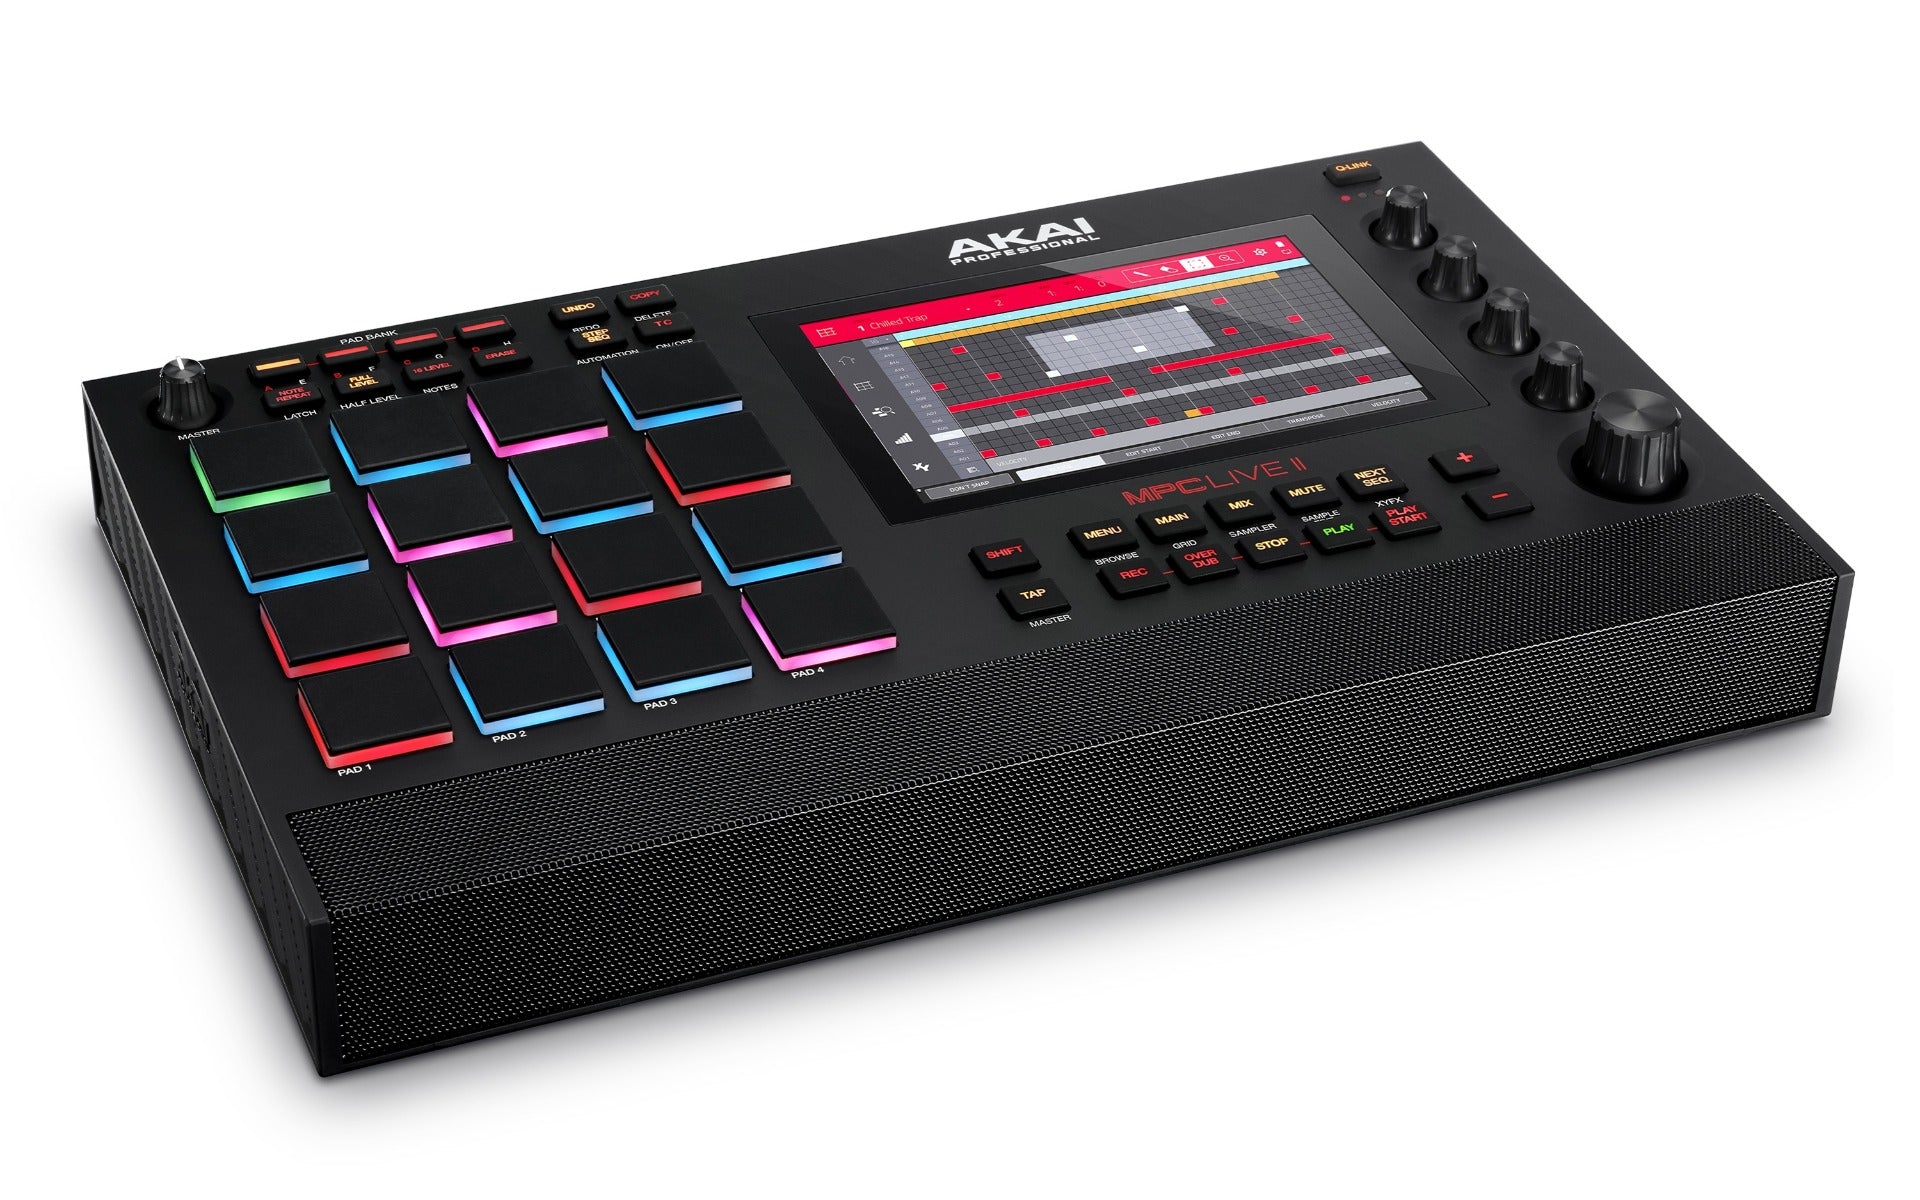 Akai Professional MPC LIVE II - Standalone MPC with 7" Touch Display & Speaker